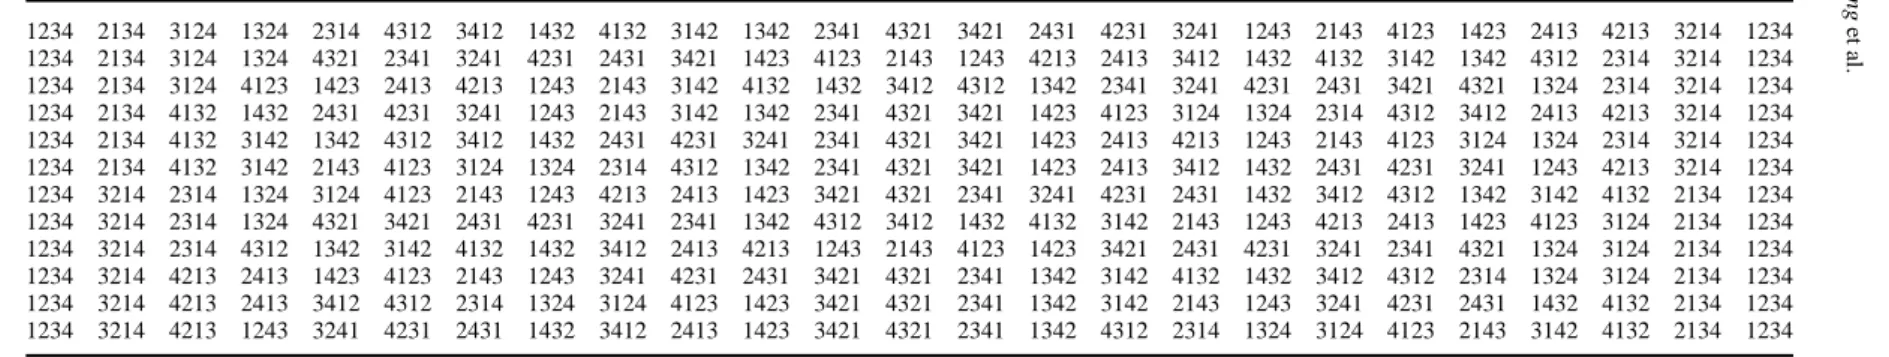 Table 2. All Hamiltonian cycles rooted at 1234 in SG 4 − {{1234, 4231}}.